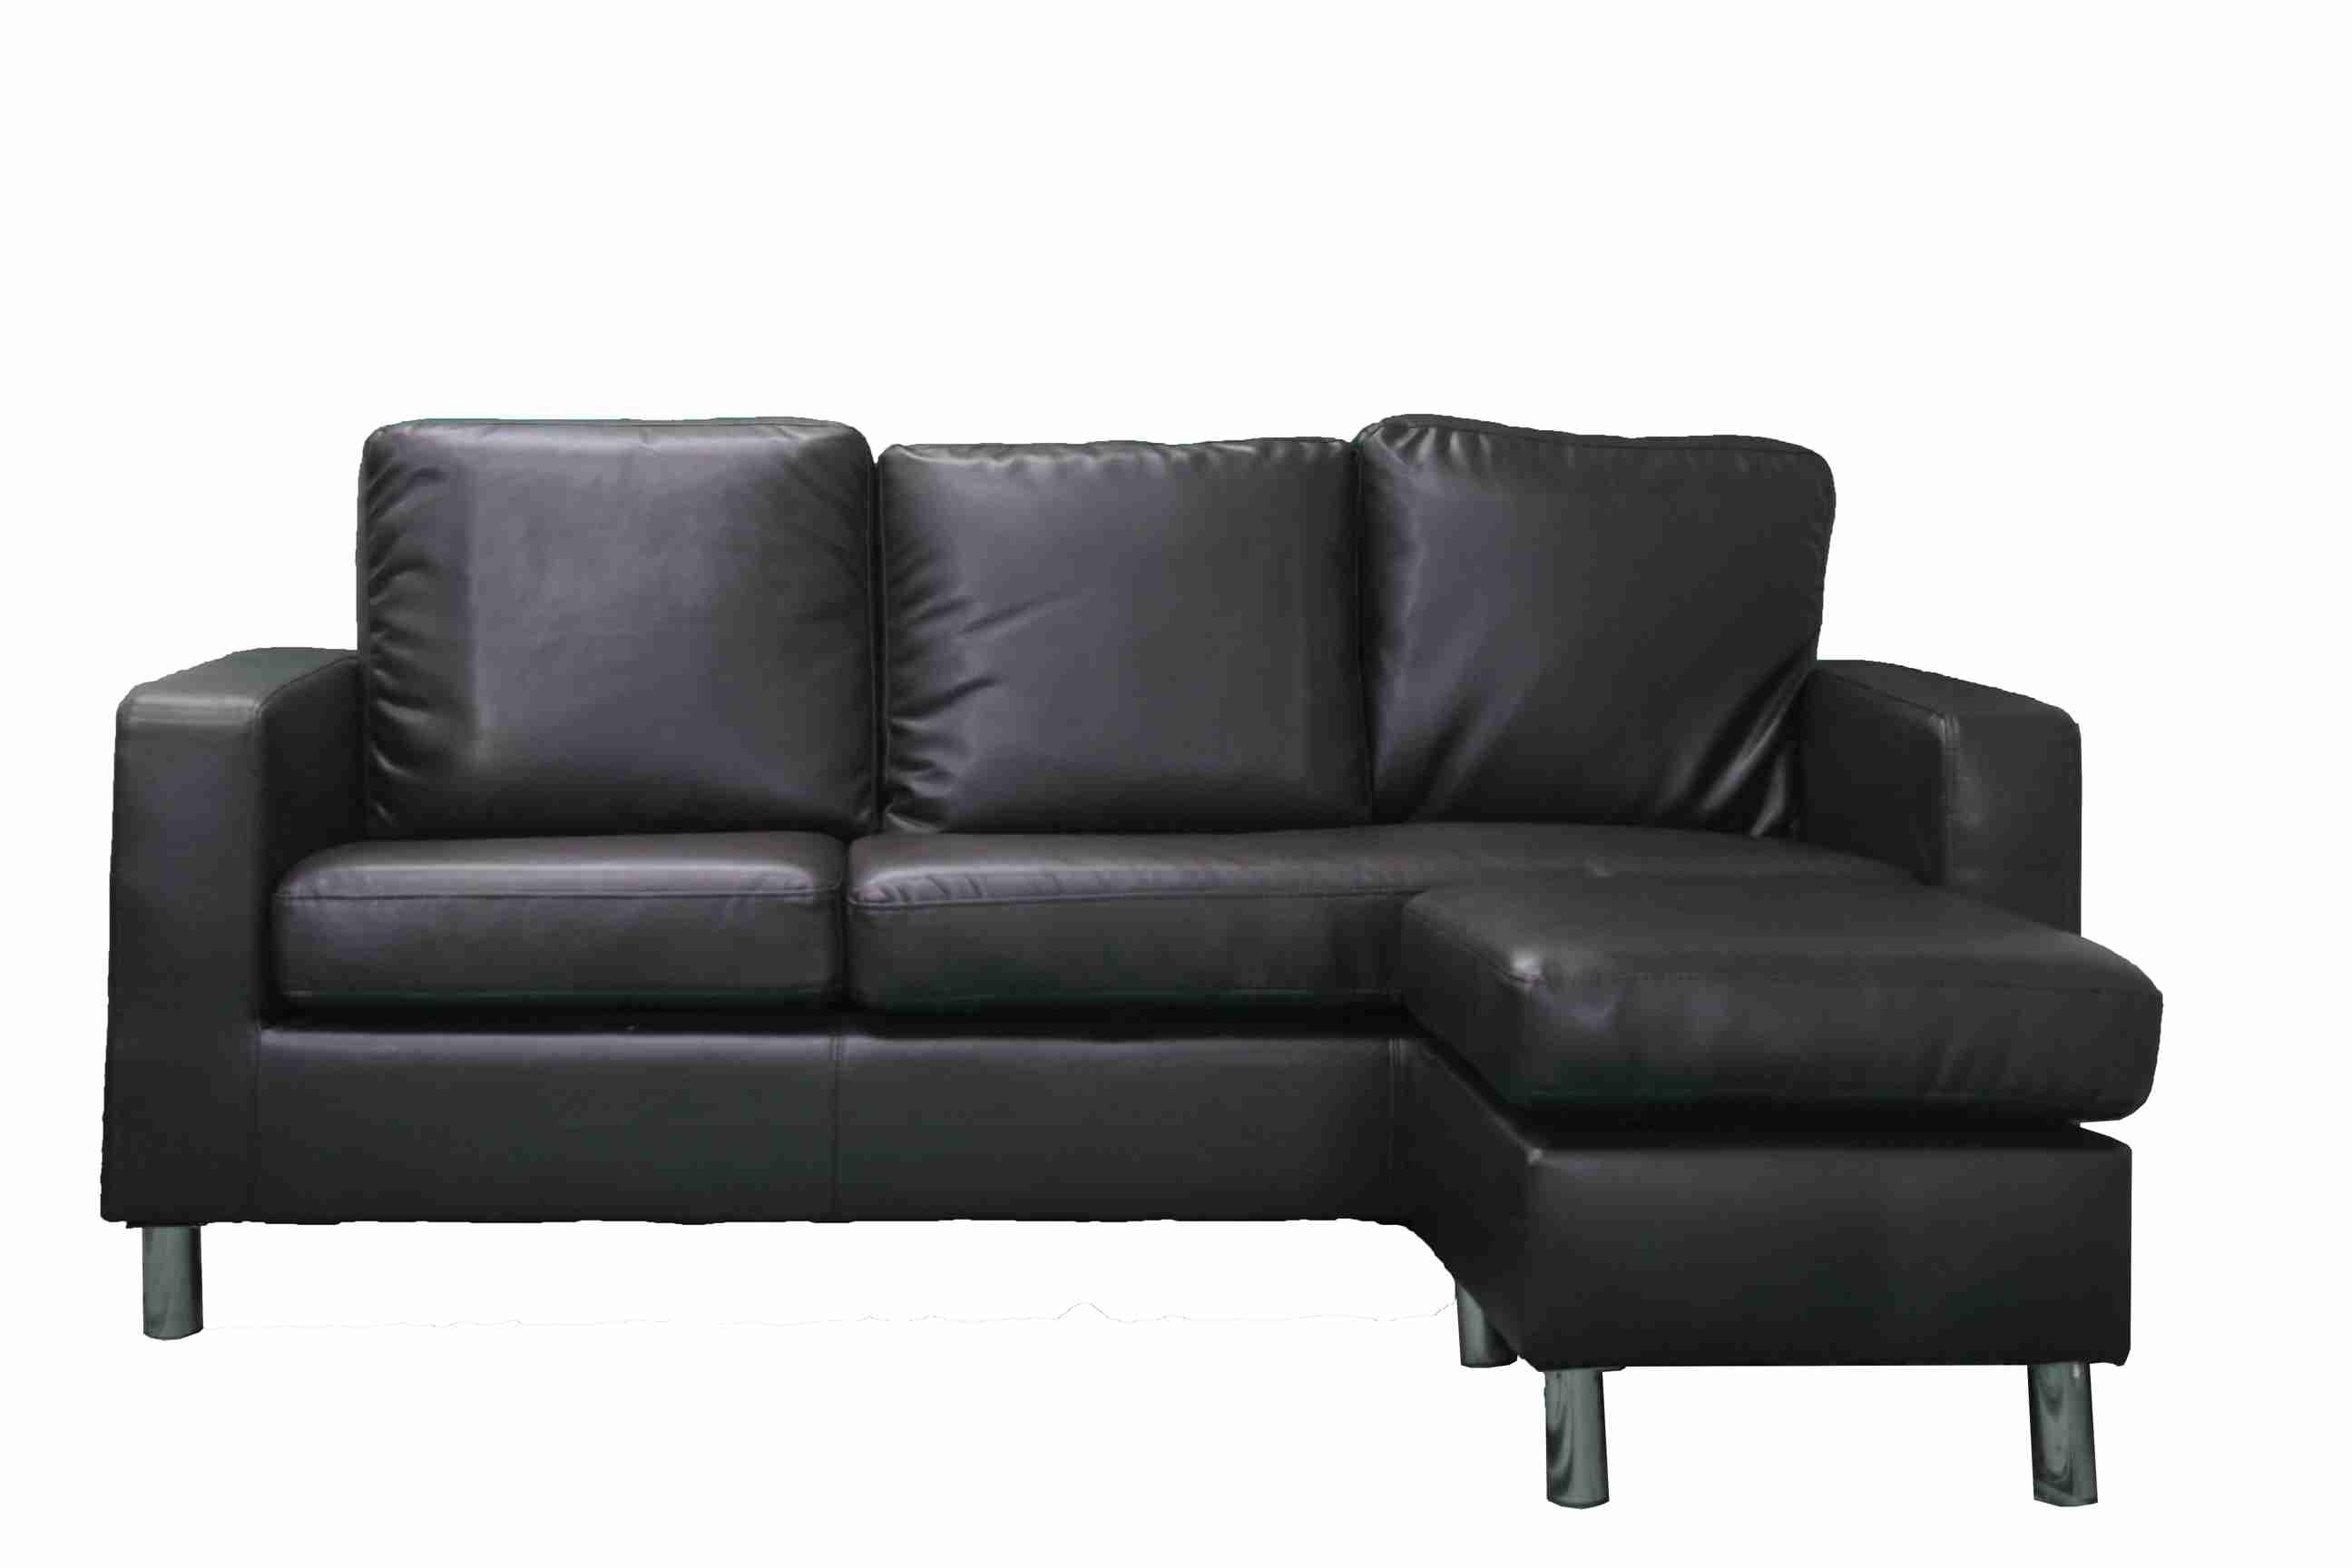 Modern PVC Leather 3 Seater Sectional Sofa Small Space Configurable Sofa-Black UH-1008-BLK